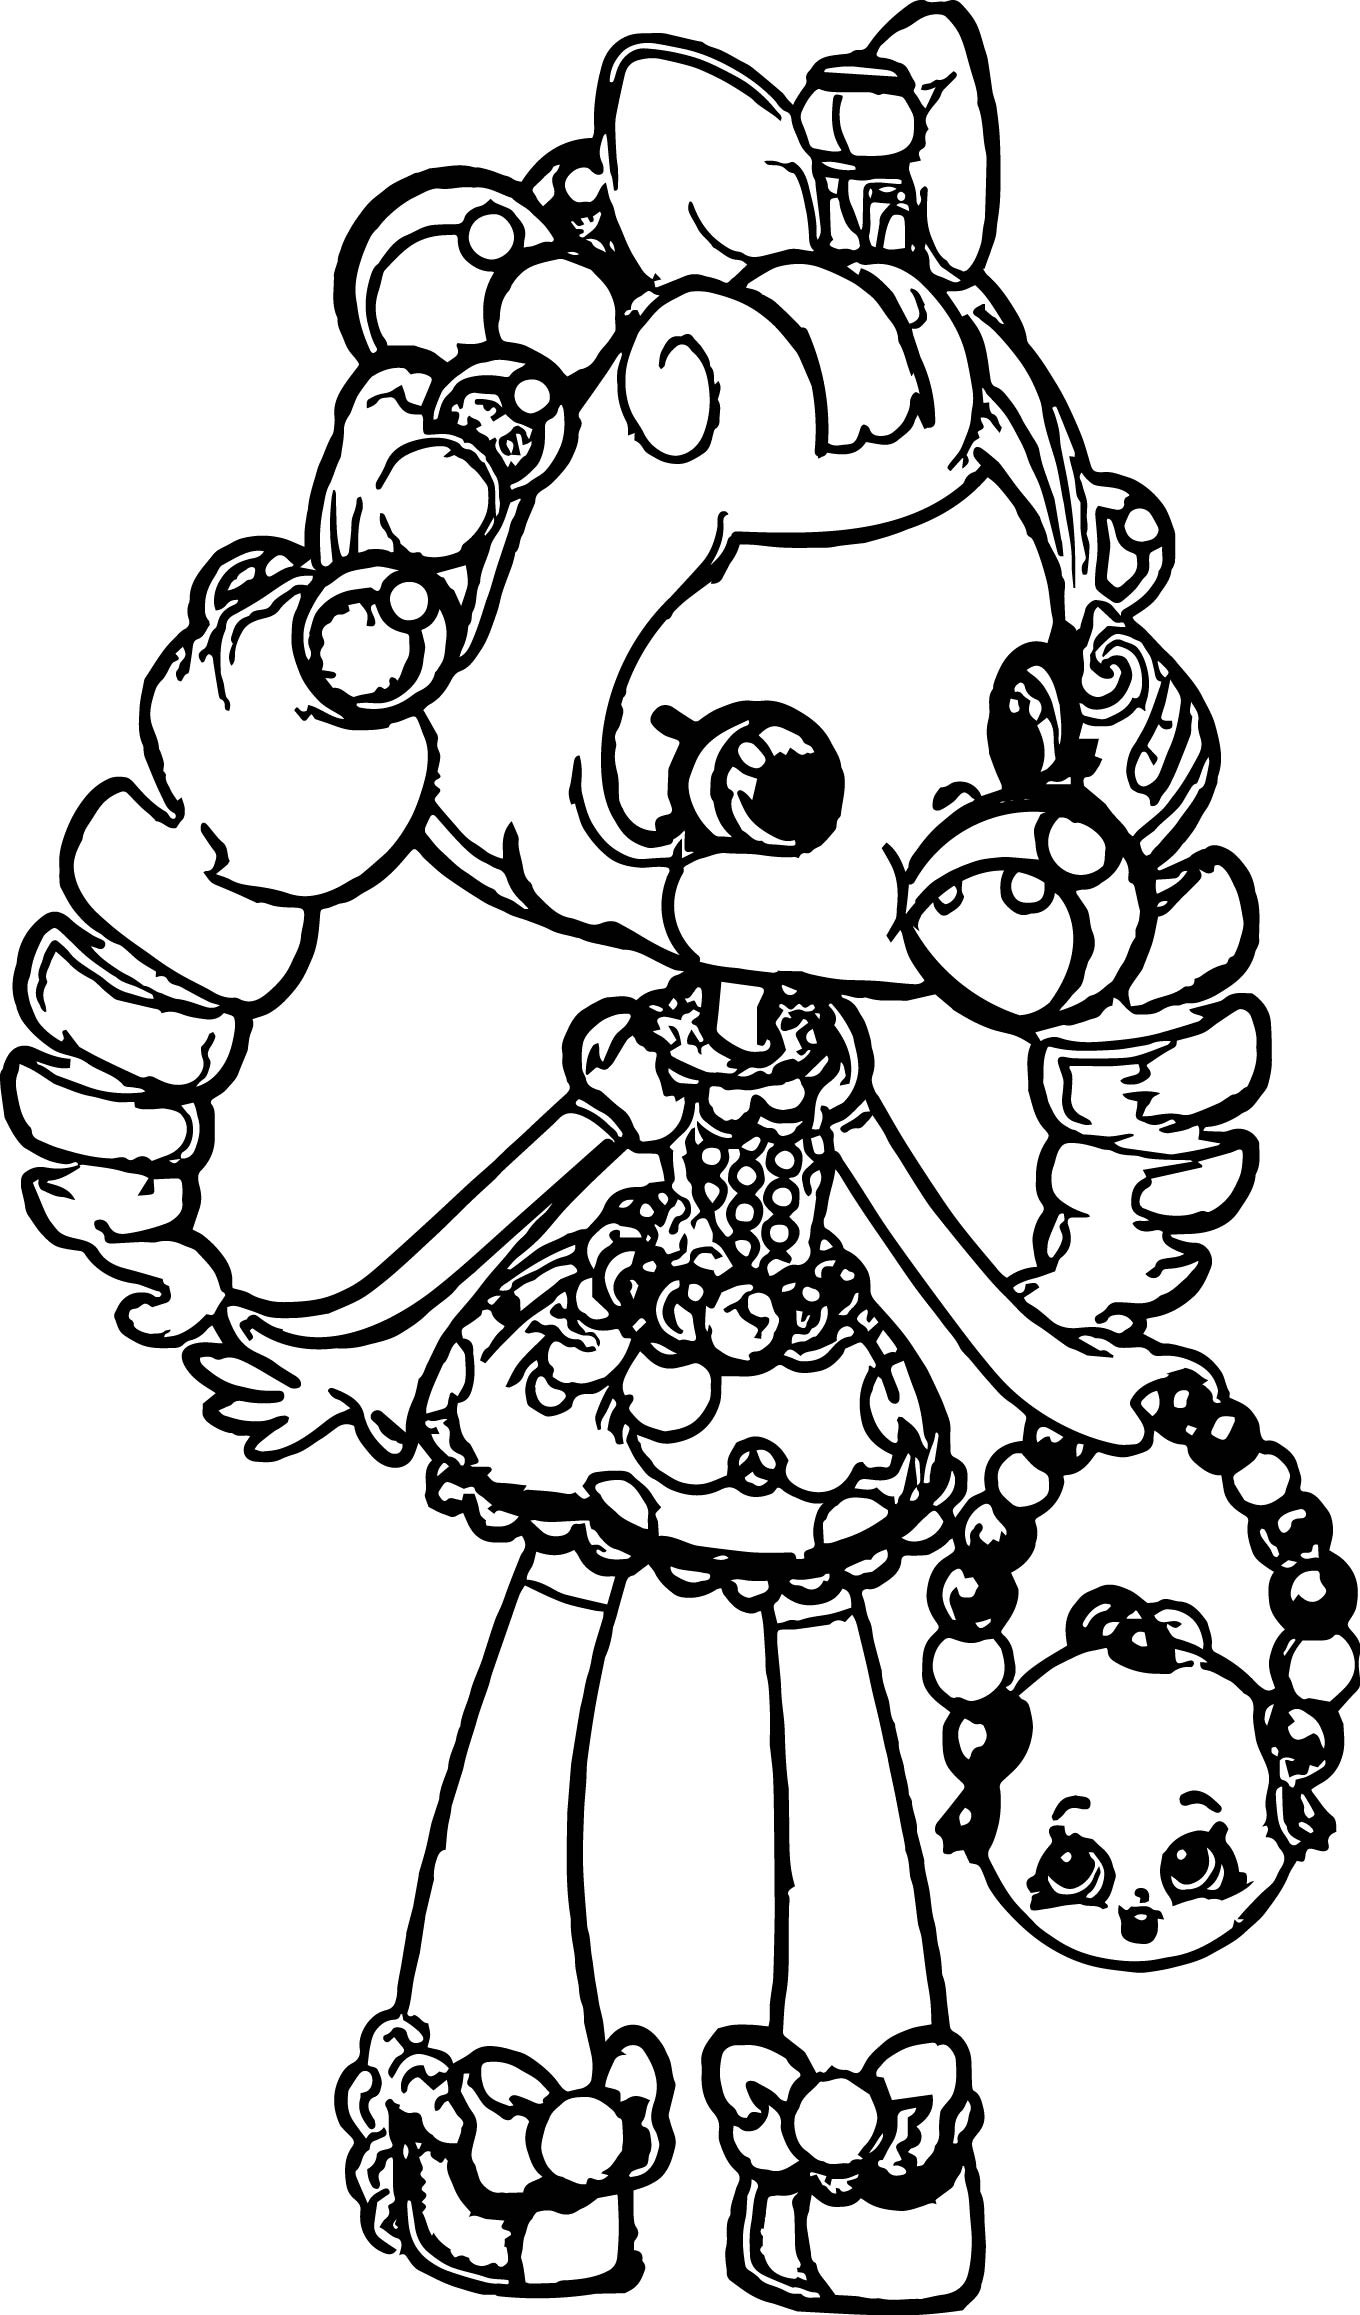 Coloring Pages For Girls Images
 Shopkins Balloon Girl Coloring Page